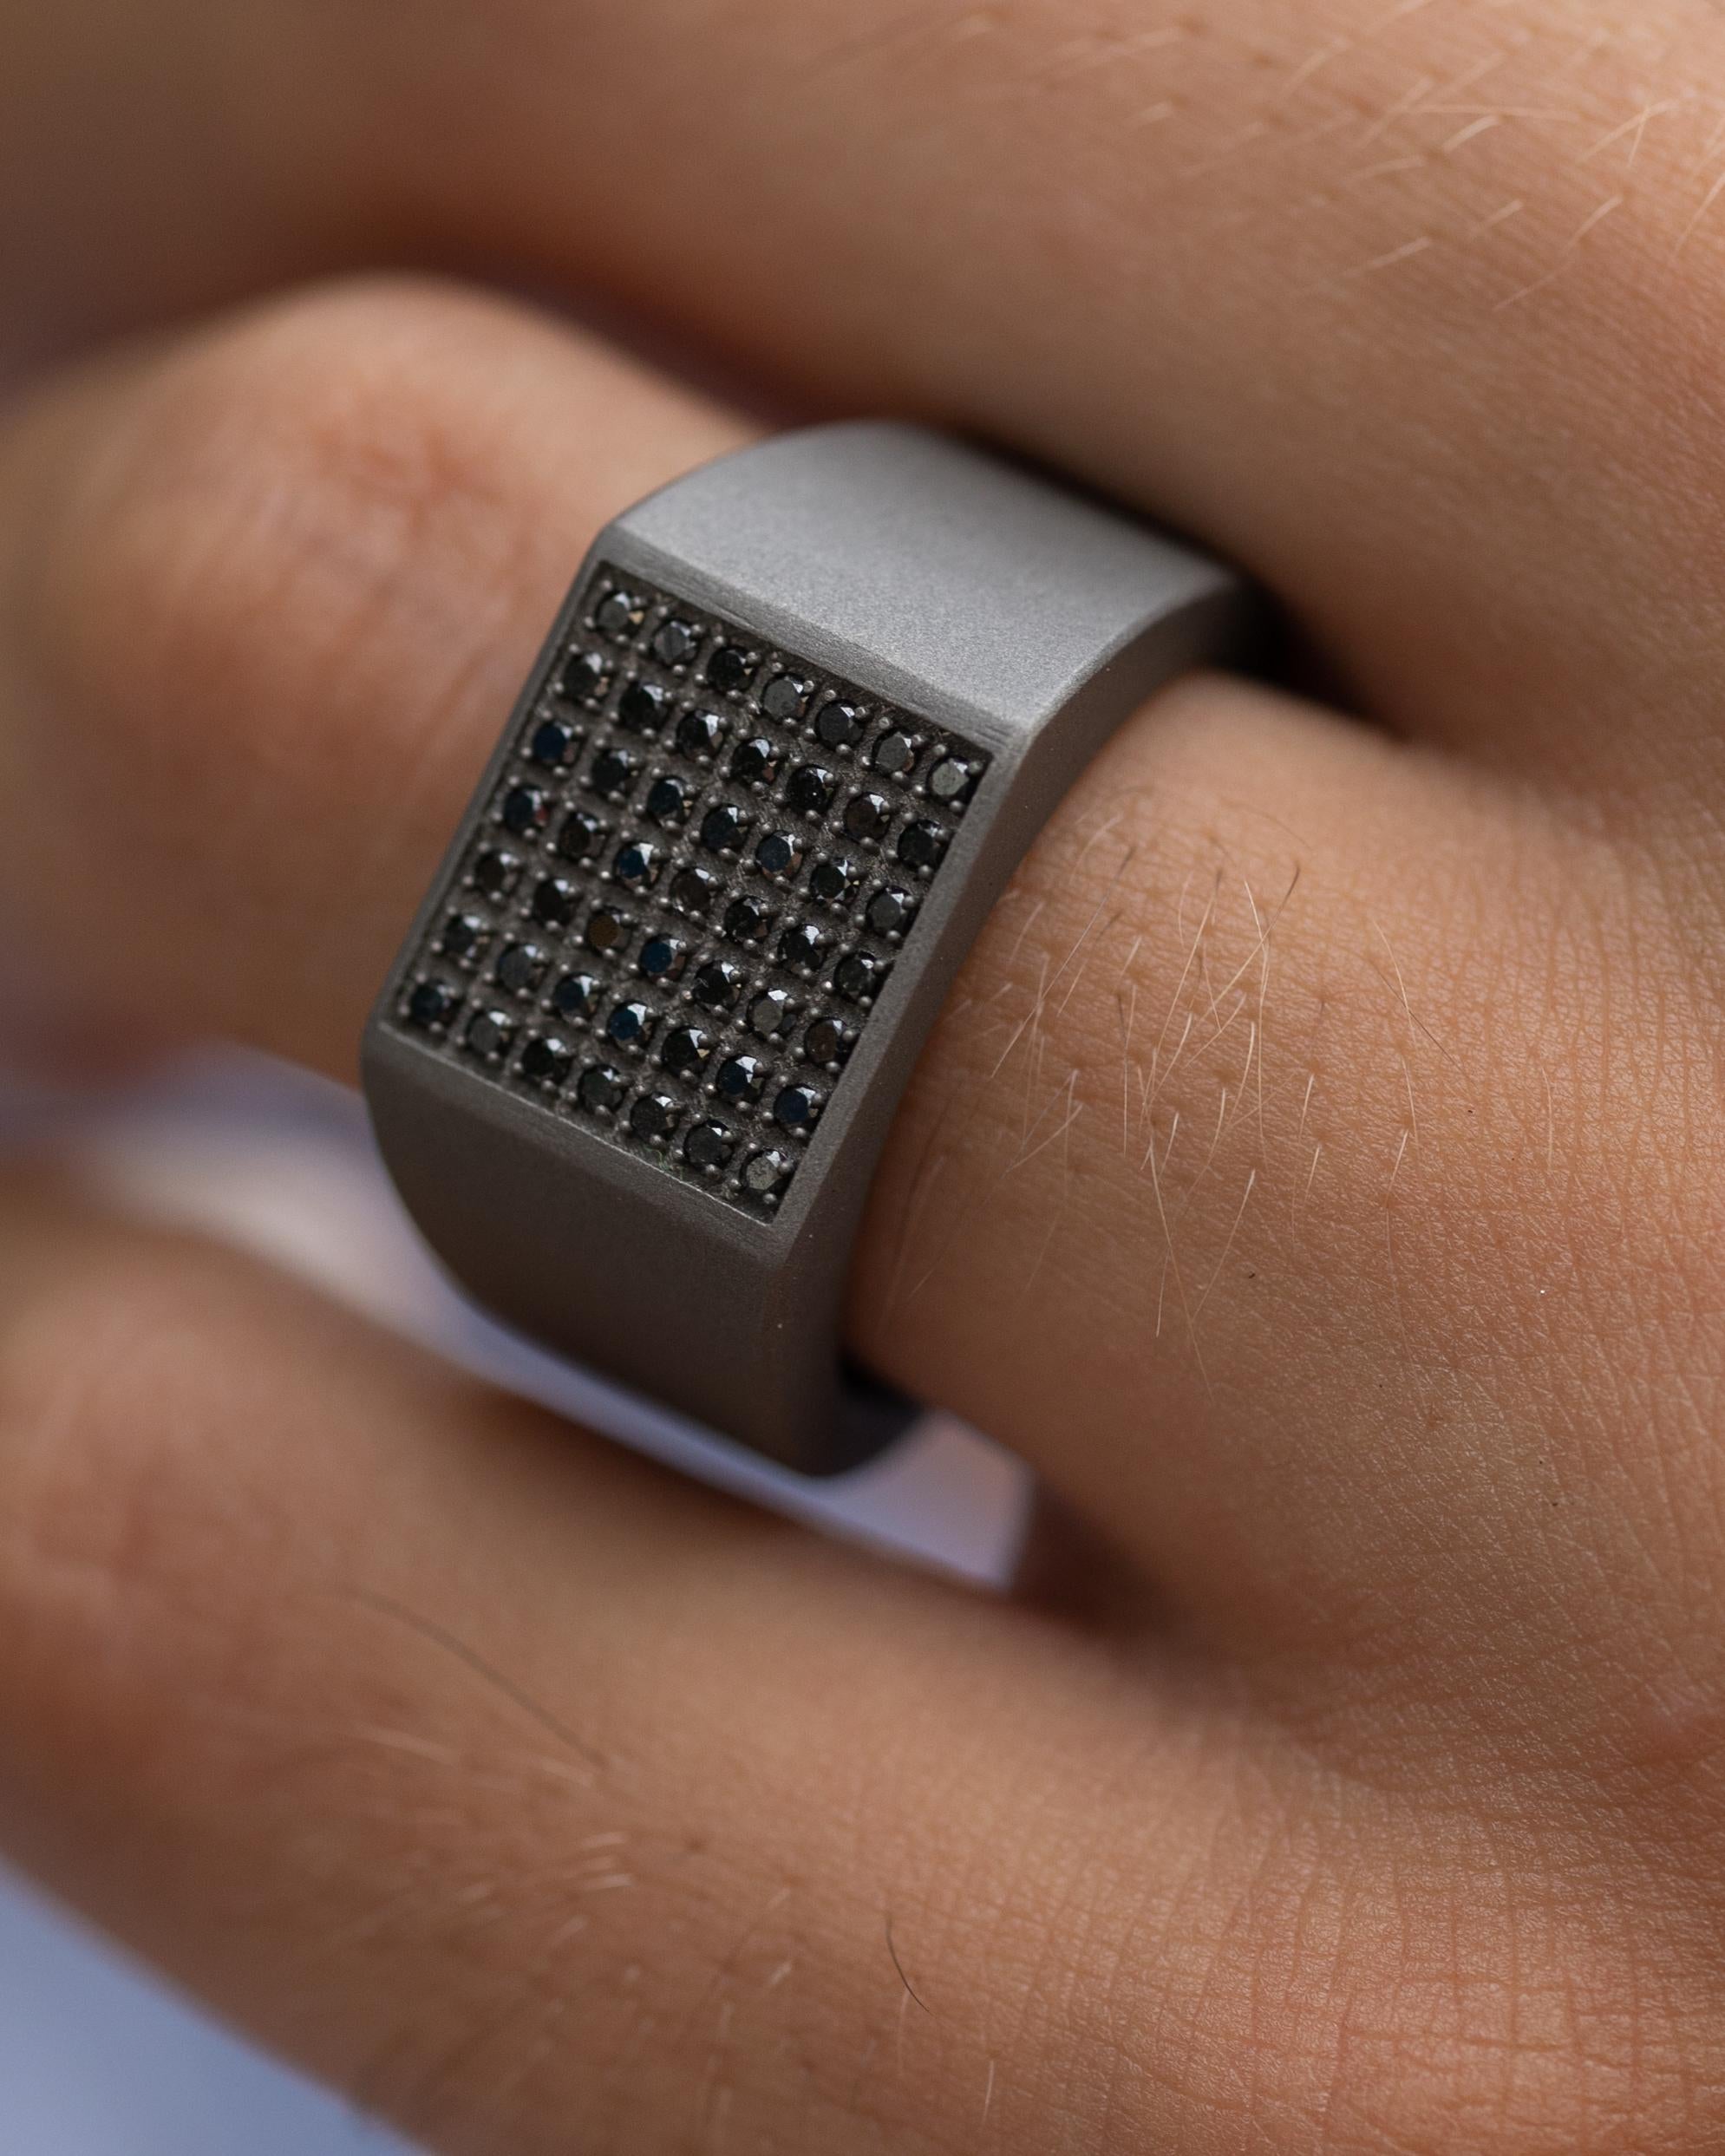 Titanium signet ring is from our Men's Collection. This masculine ring is made of 49 natural black round diamonds in total of 0.49 Carat with a 18K rose gold detail on the band. The widest part of the ring is 1.2cm and the thinest is 0.6cm. Perfect